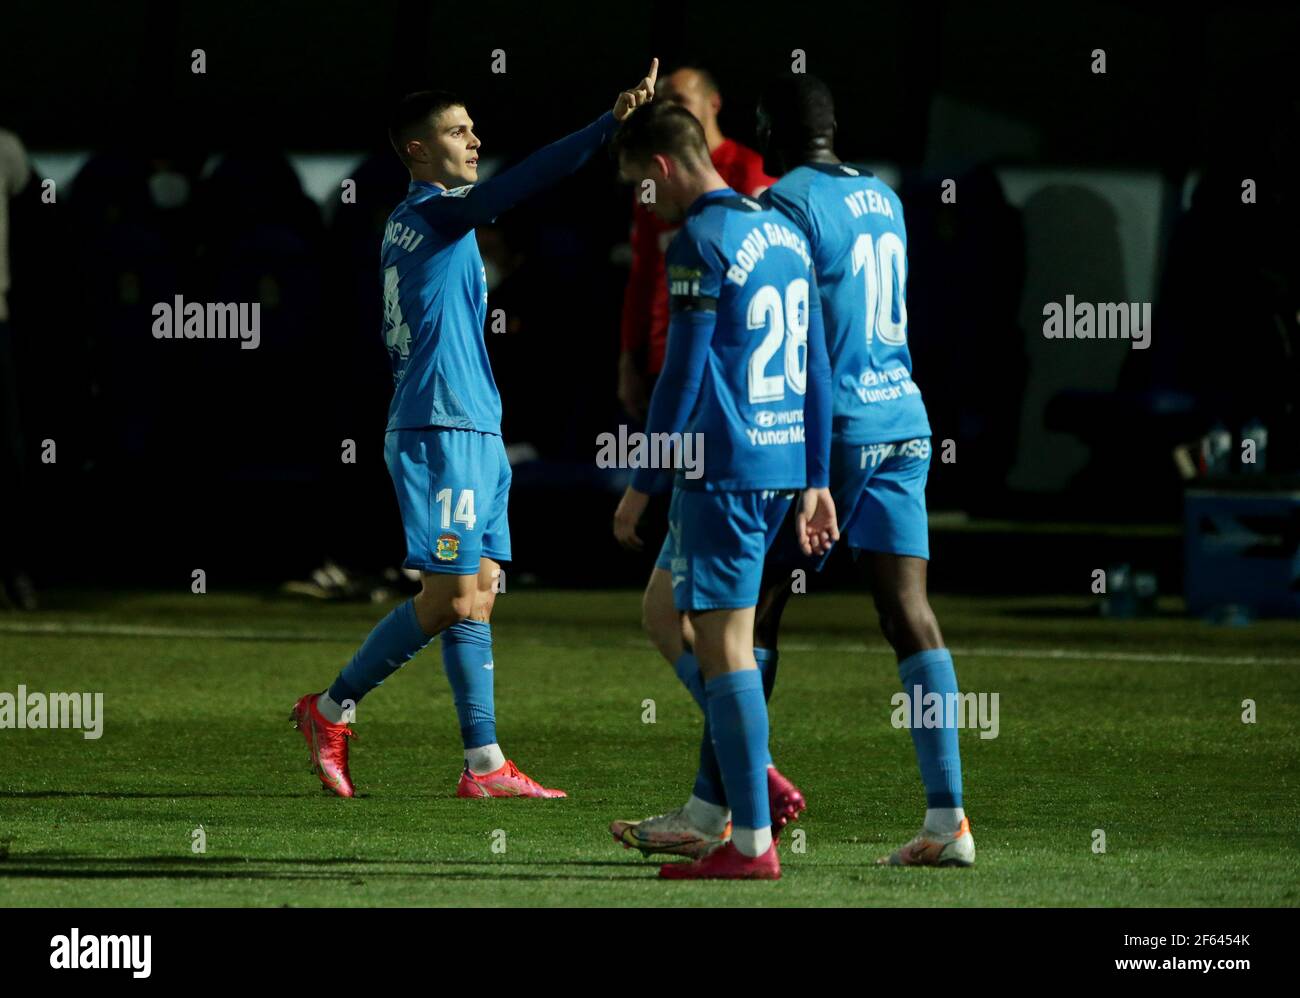 Fuenlabrada, Madrid, Spain, 29.03.2021C. F. Fuenlabrada against R. C. D. Mallorca match of the second division of Spanish soccer in match 31. Fuenlabrada player Oscar Pichi celebrate your goal Final score 4-1 winner Fuenlabrada with goals from the players Oscar Pichi 13 y 38  Nteka 41  and Pathe Ciss 73  Mallorca scores his player Mboula 56  Photo: Juan Carlos Rojas/Picture Alliance | usage worldwide Stock Photo